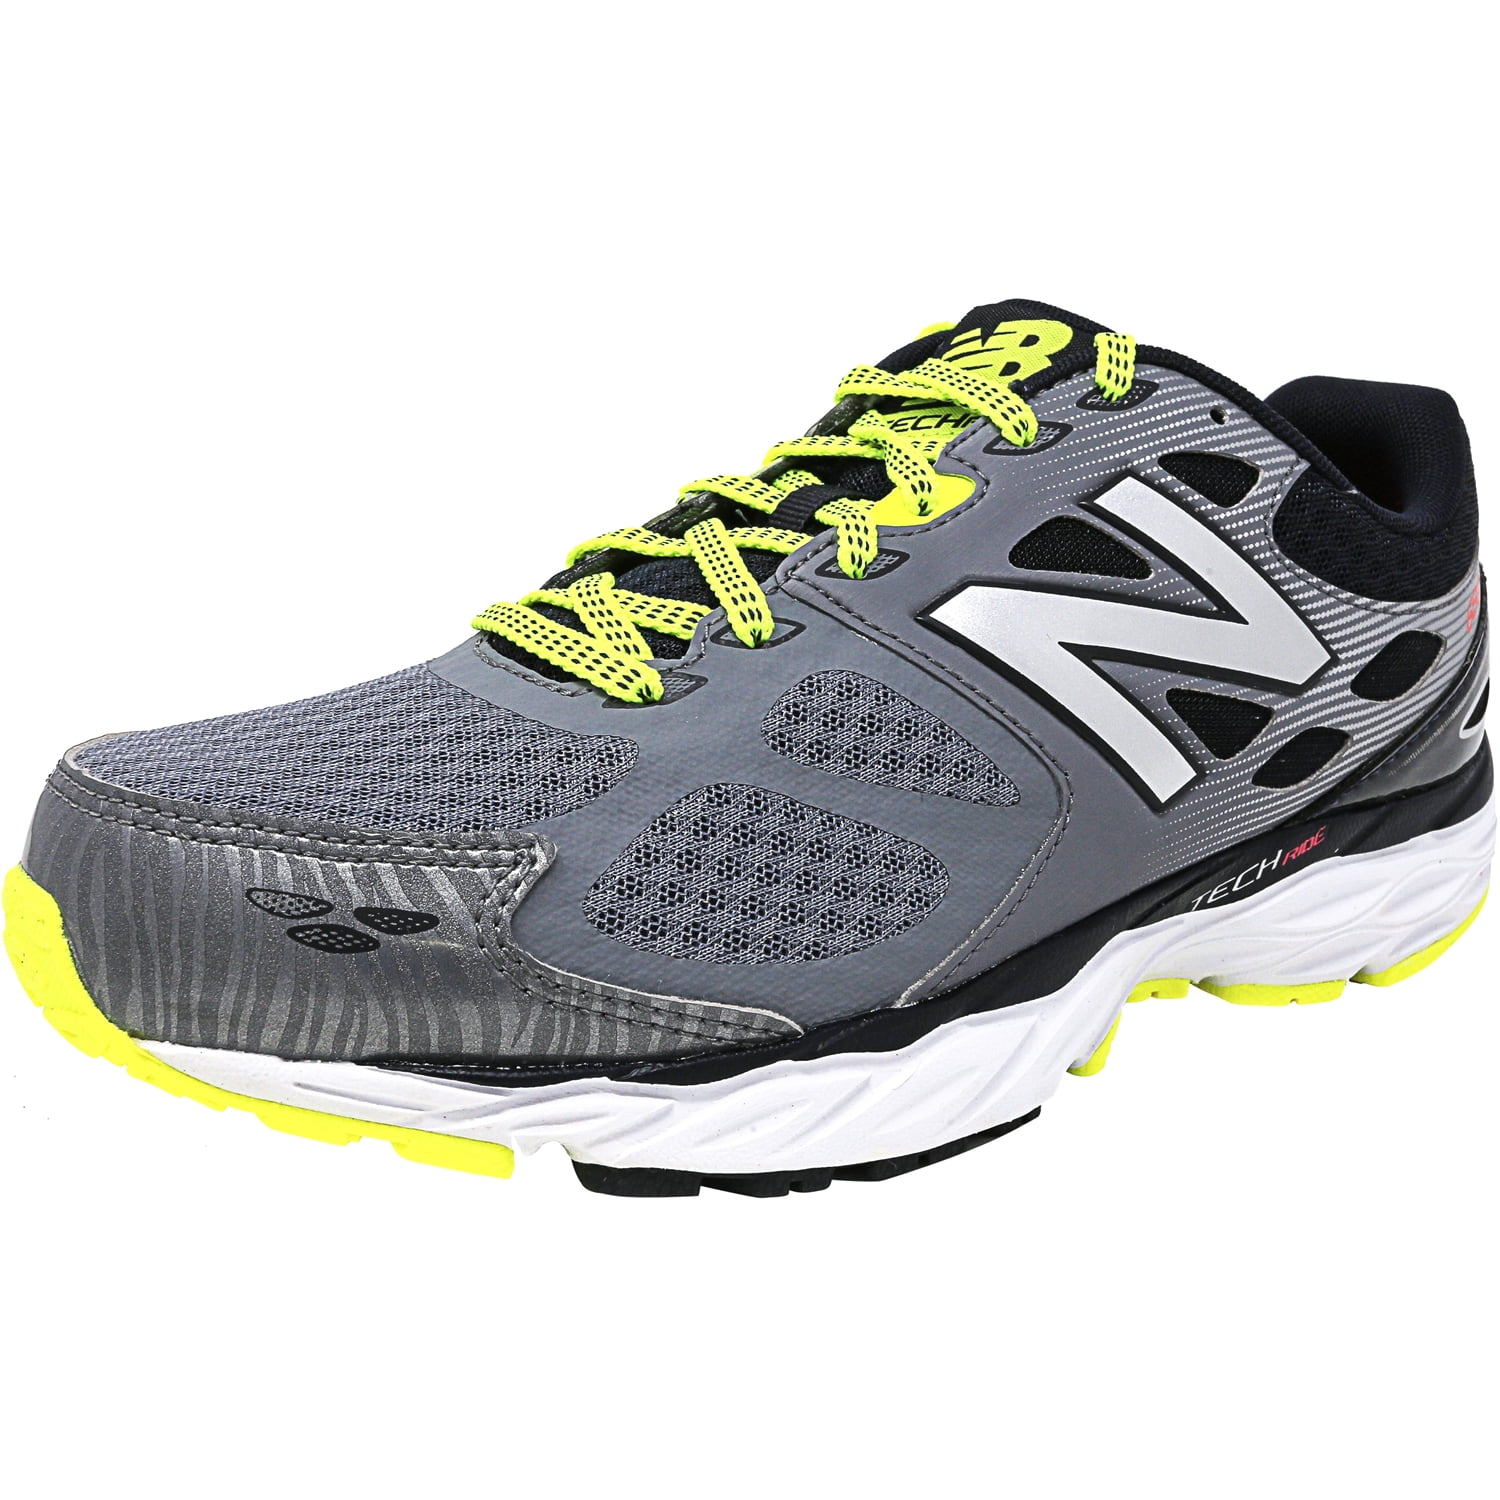 New Balance Men's M680 Rg3 Ankle-High Leather Running Shoe - 8W ...